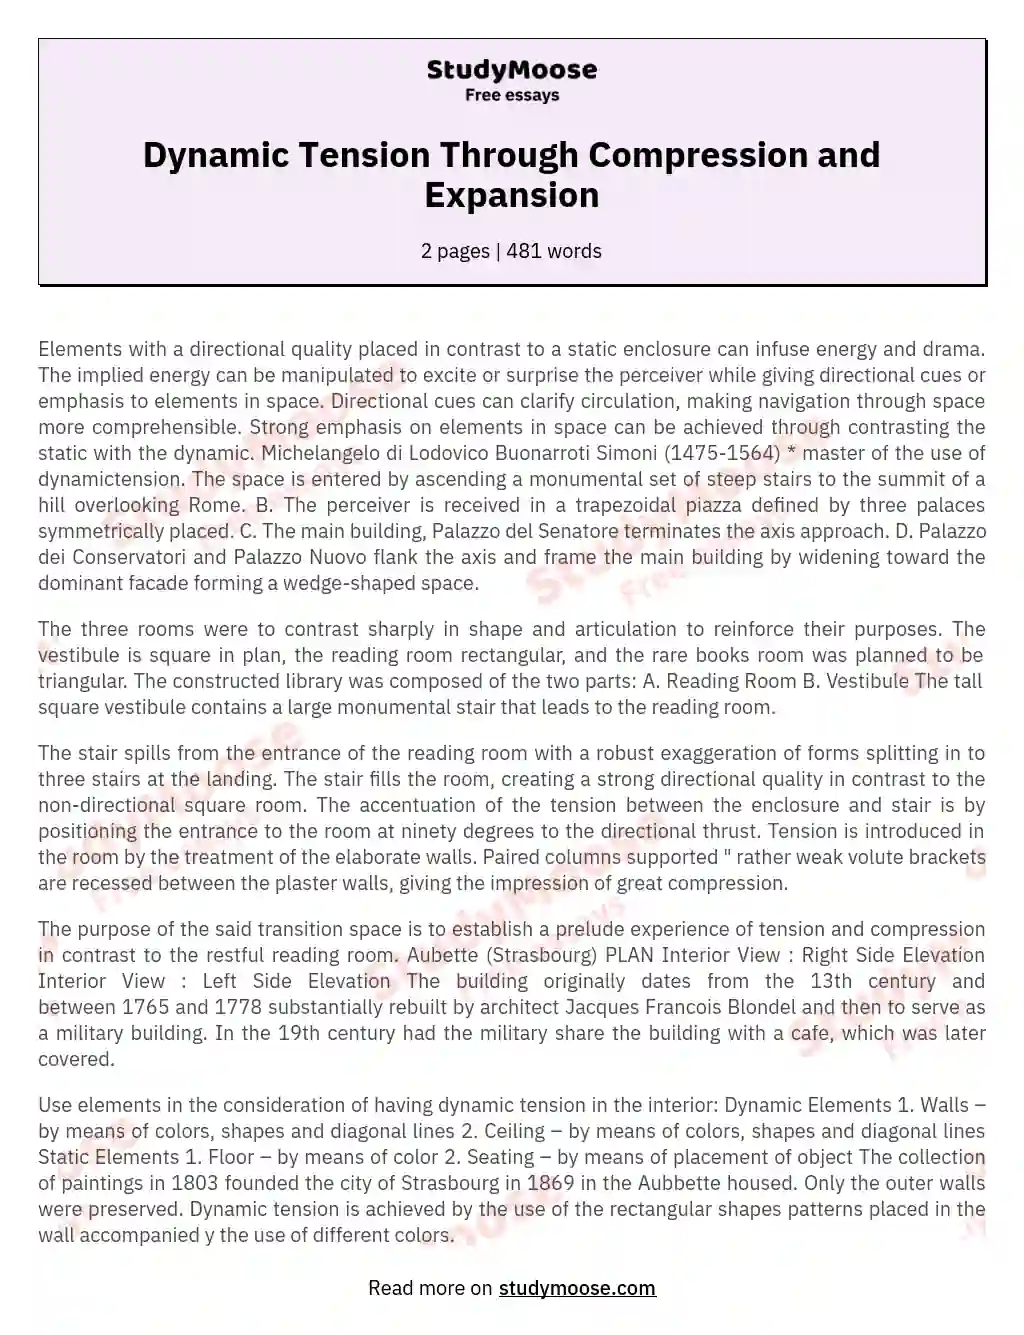 Dynamic Tension Through Compression and Expansion essay